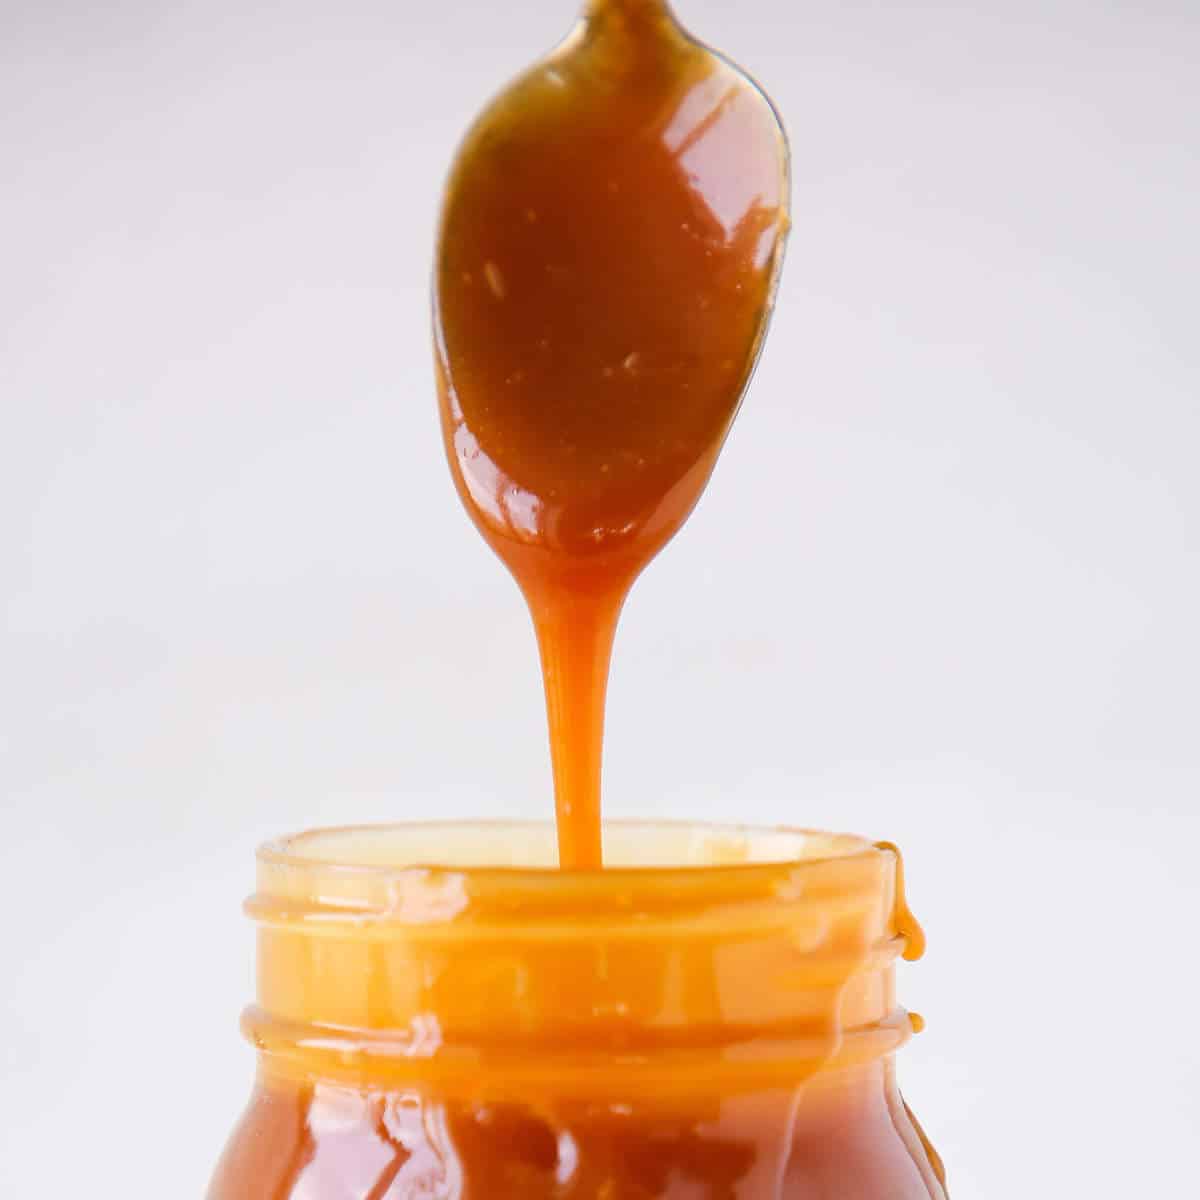 salted caramel sauce dripping from spoon. 